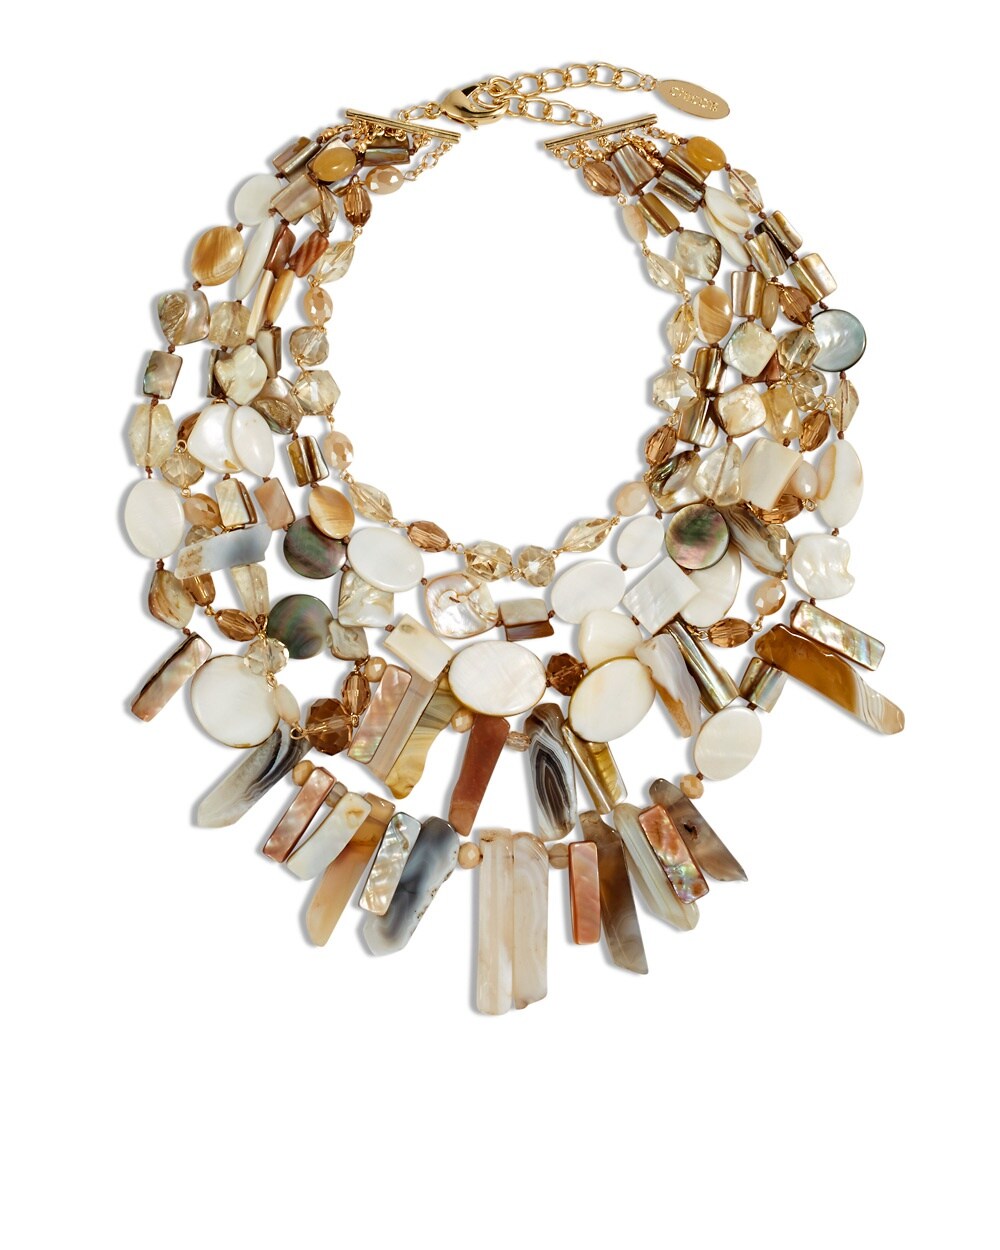 The Shelle Necklace